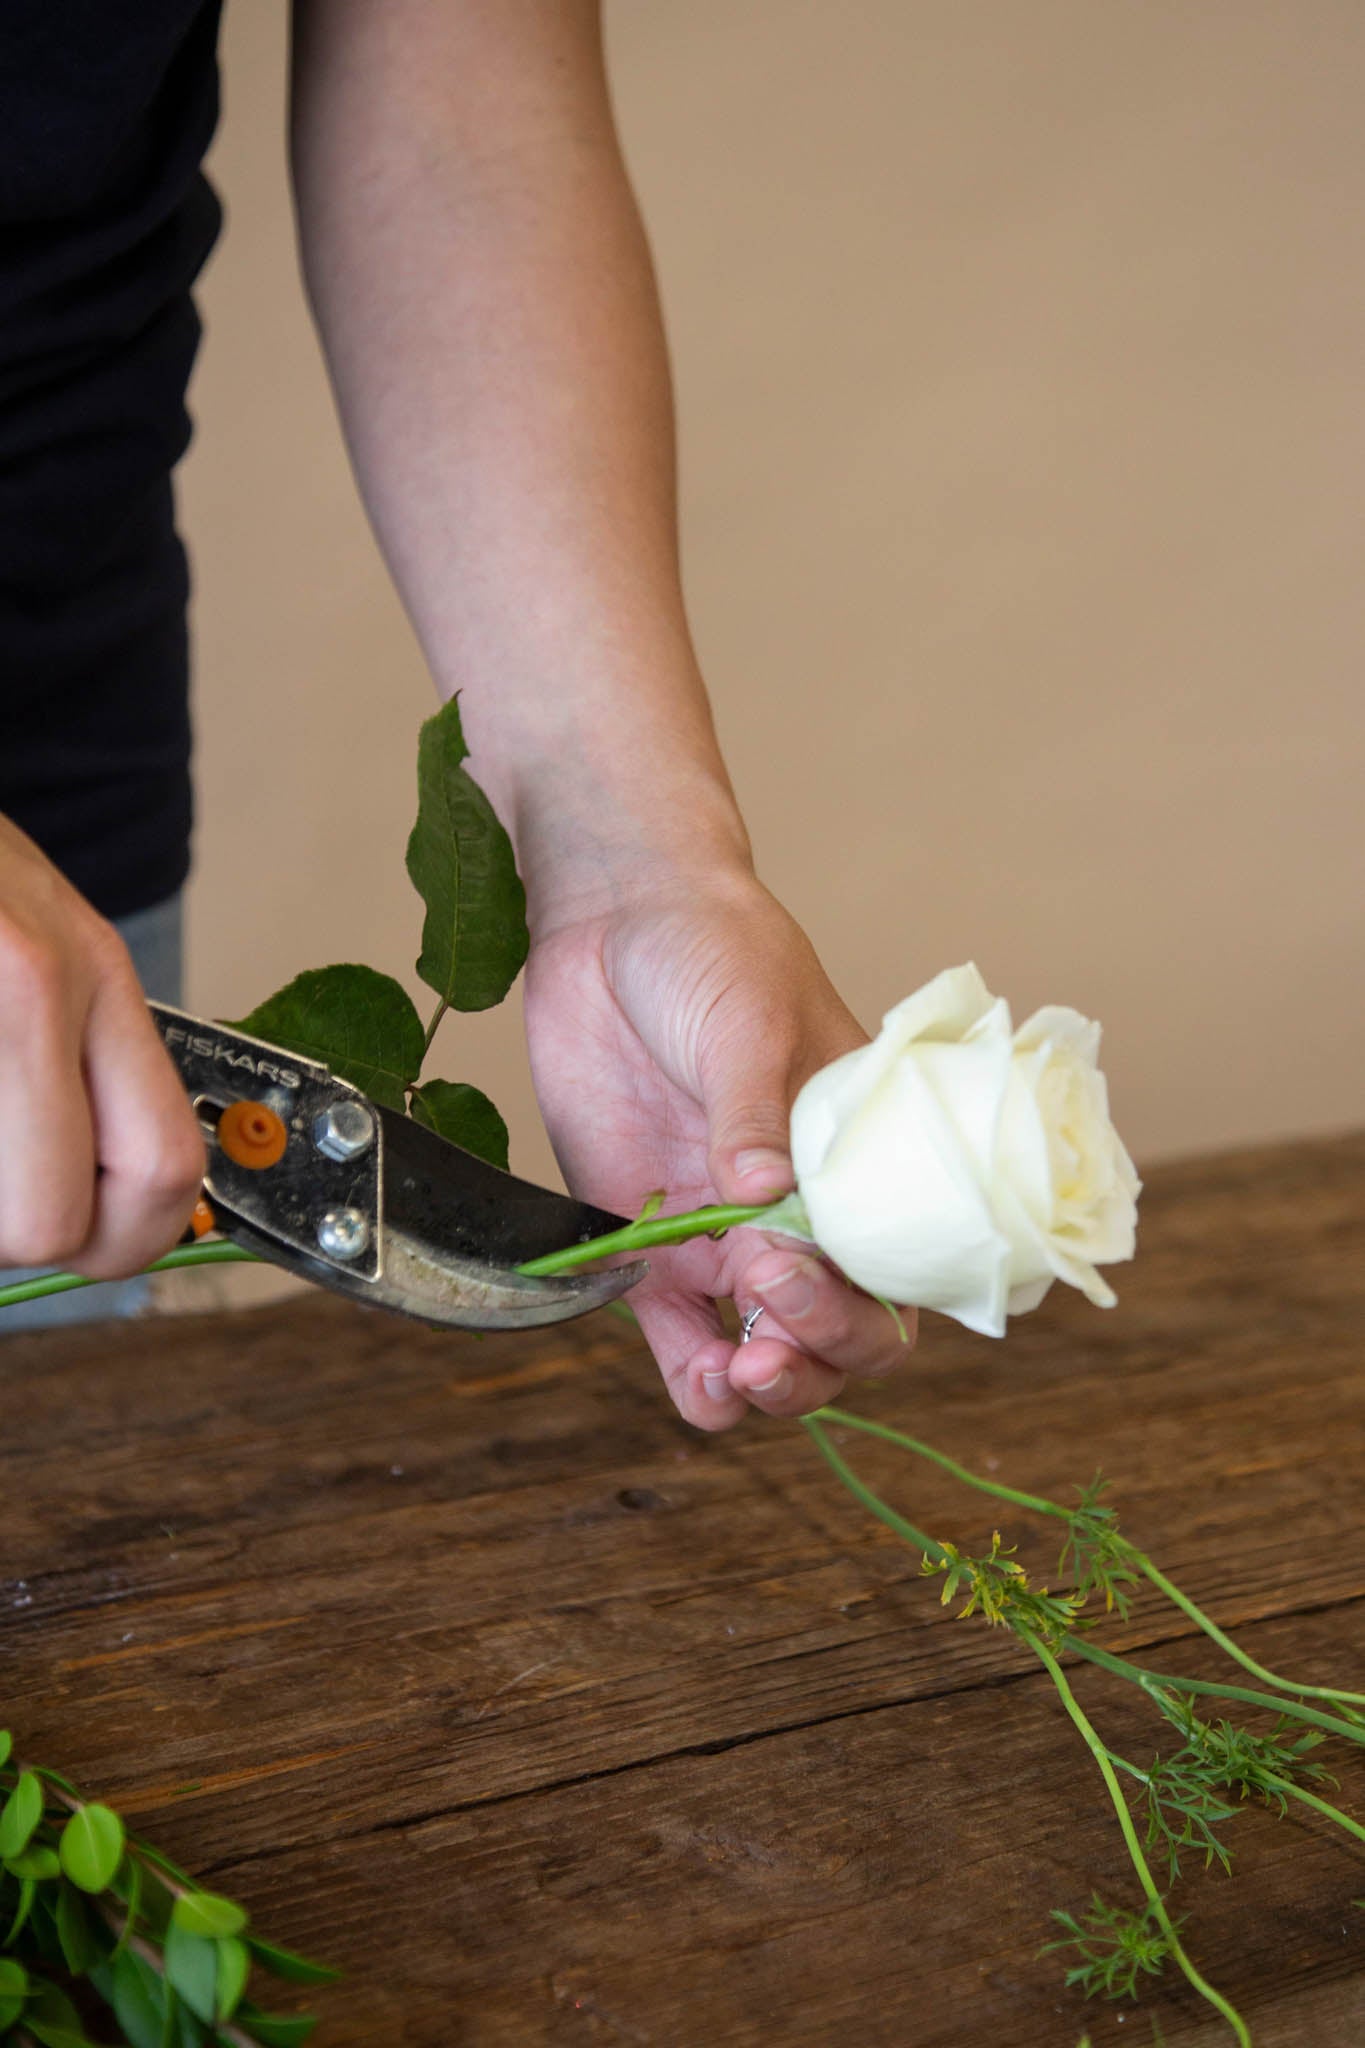 Trim your stems down to 1.5 inch pieces for your DIY corsage